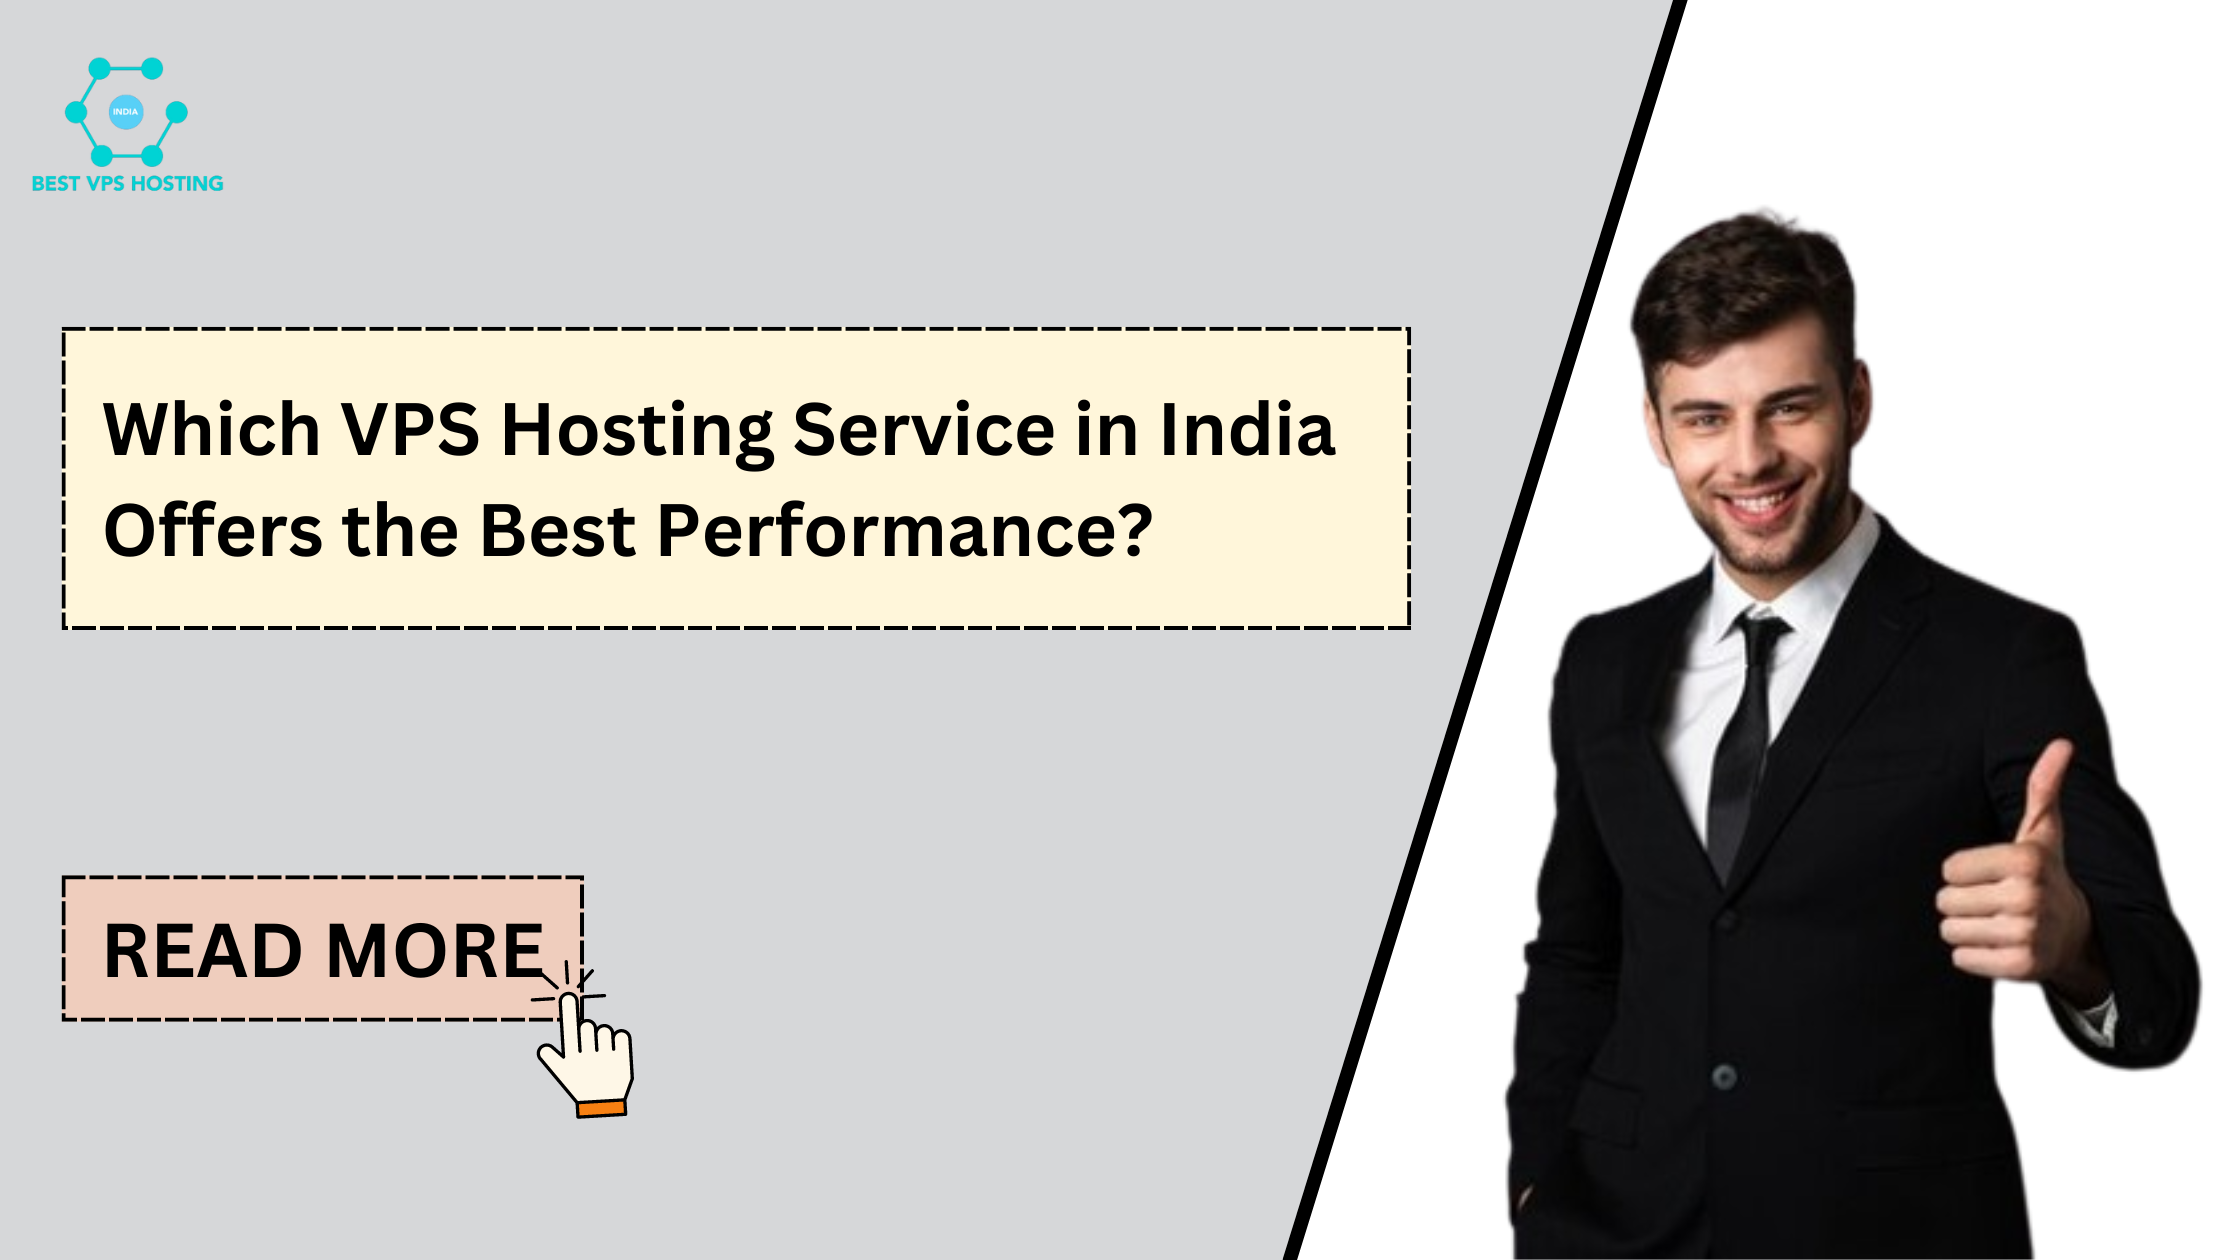 Which VPS Hosting Service in India Offers the Best Performance?